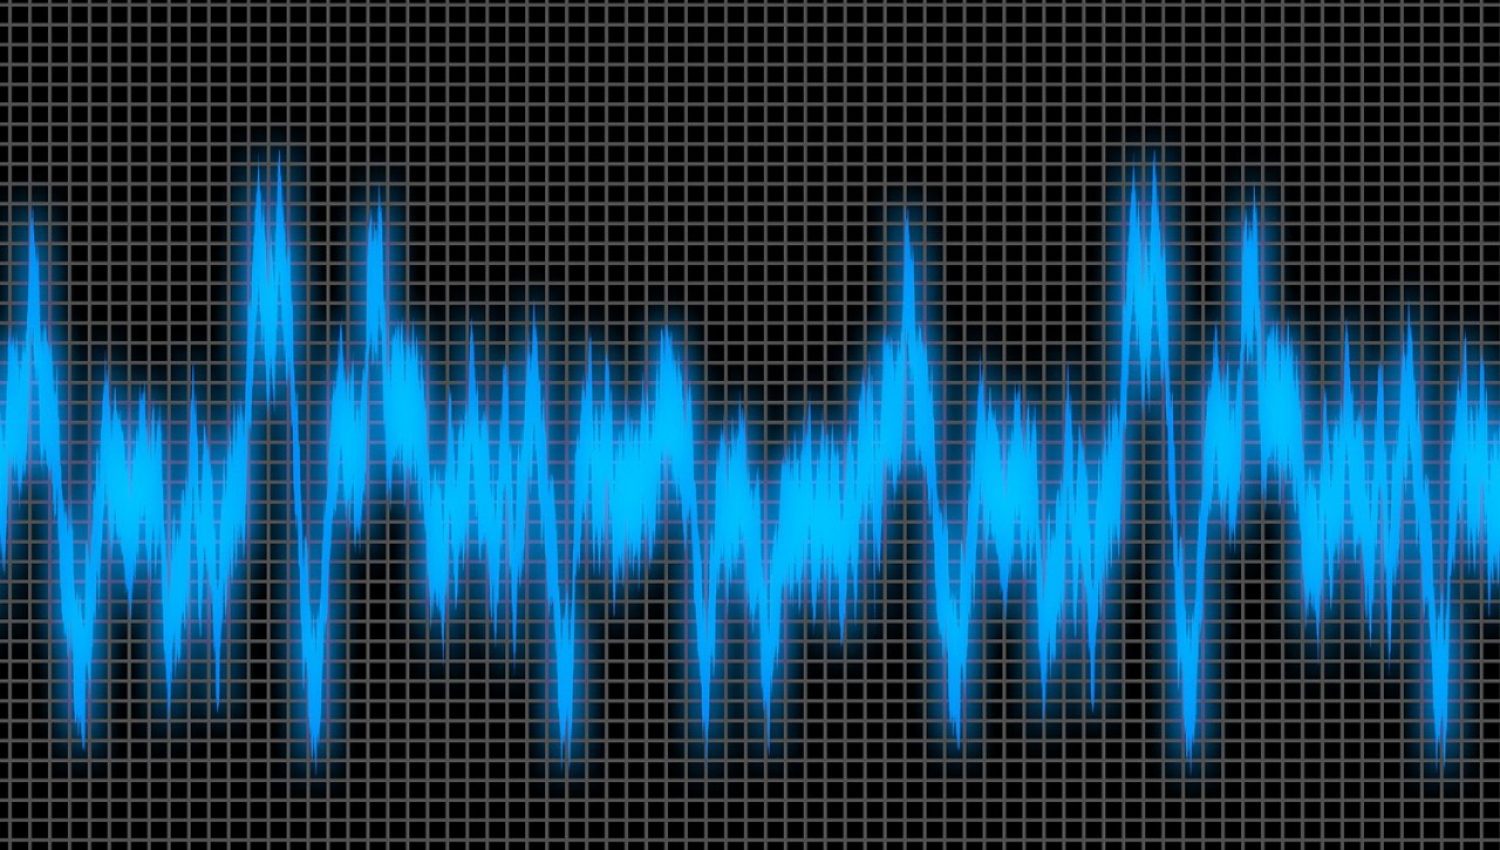 A chart showing sound waves